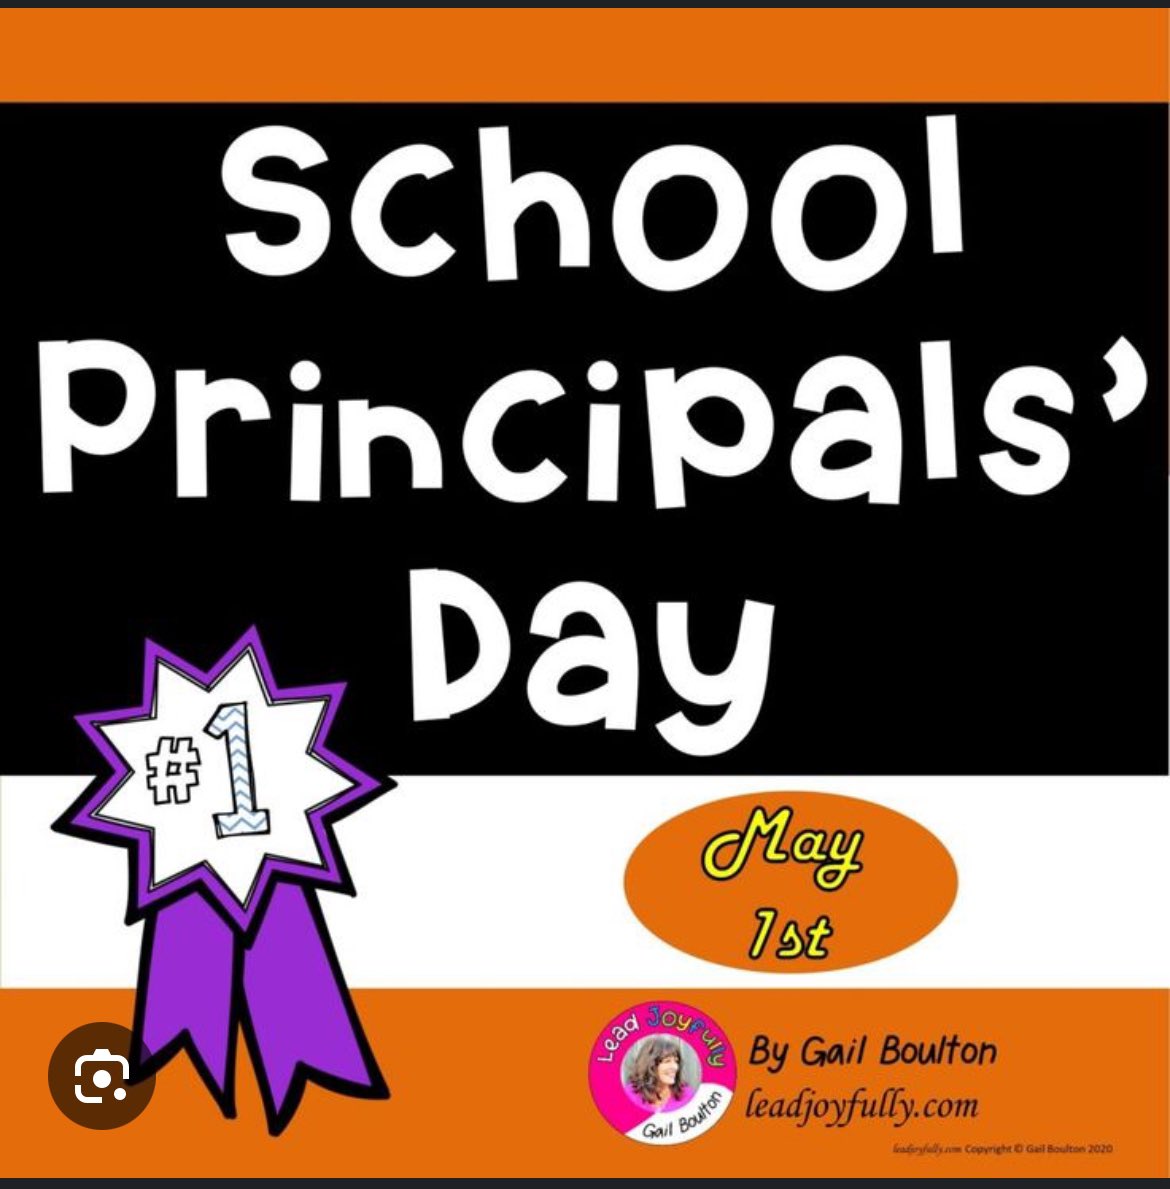 To all of my colleagues here in the best school system @FultonCoSchools doing the work of supporting children and teachers HAPPY PRINCIPAL’S DAY… keep going!